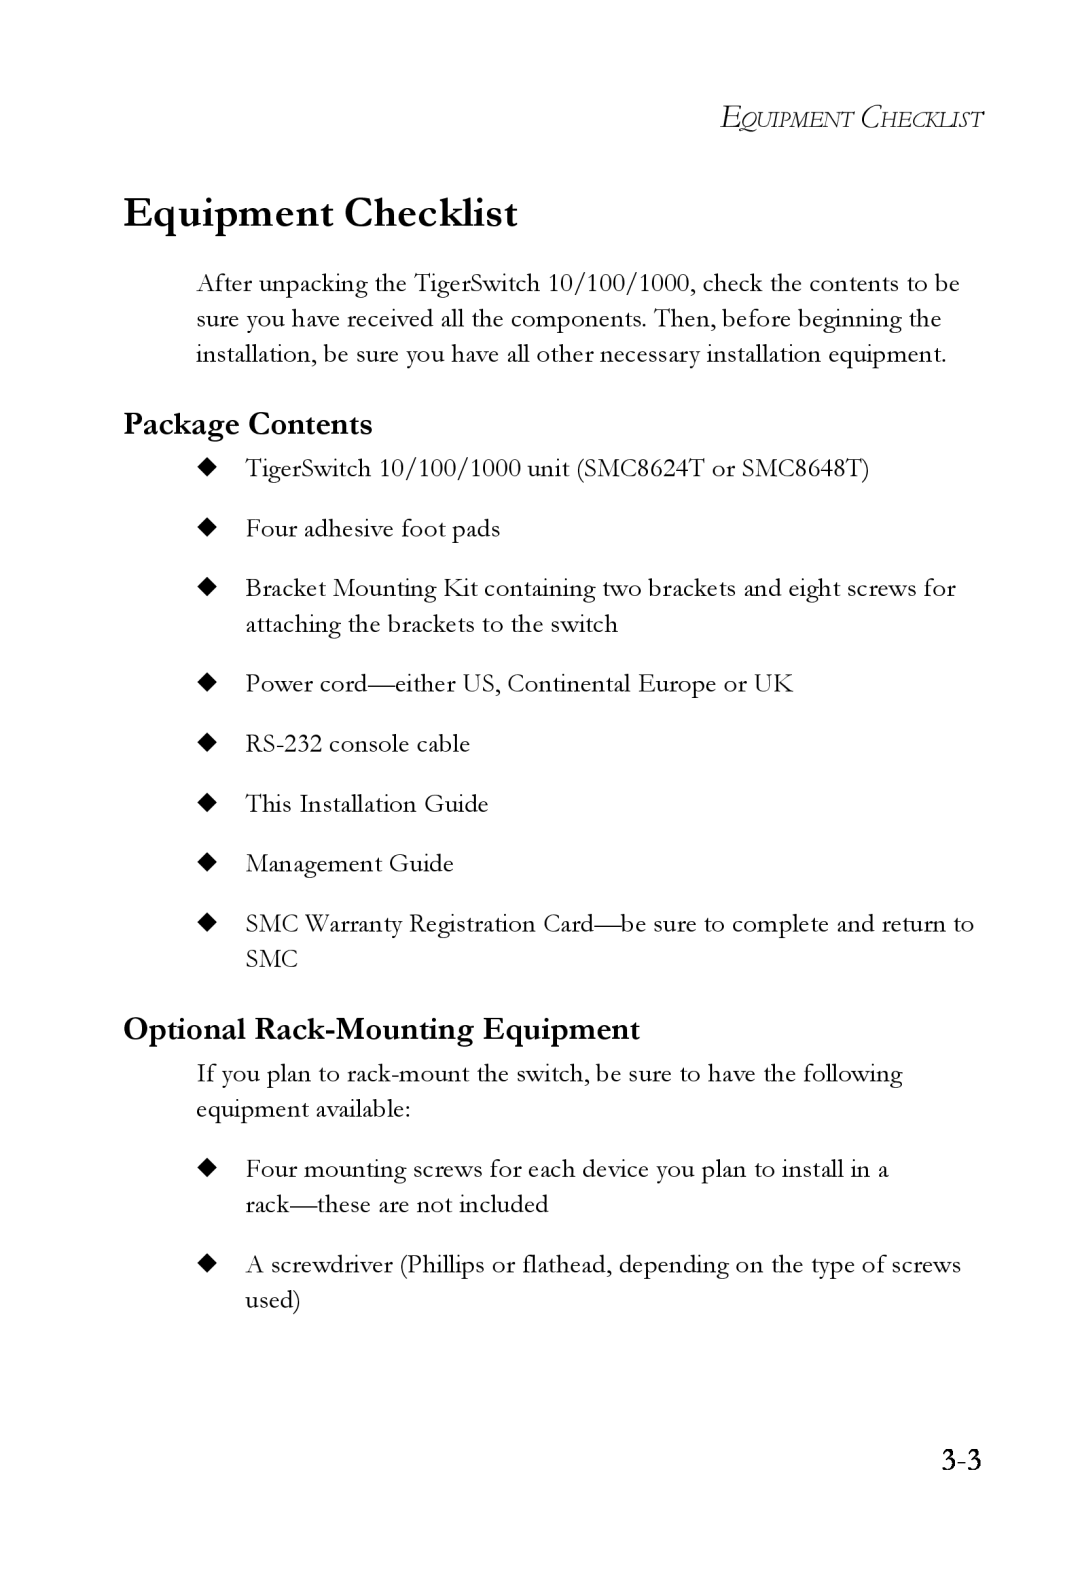 SMC Networks SMC8624T manual Equipment Checklist, Package Contents, Optional Rack-Mounting Equipment 